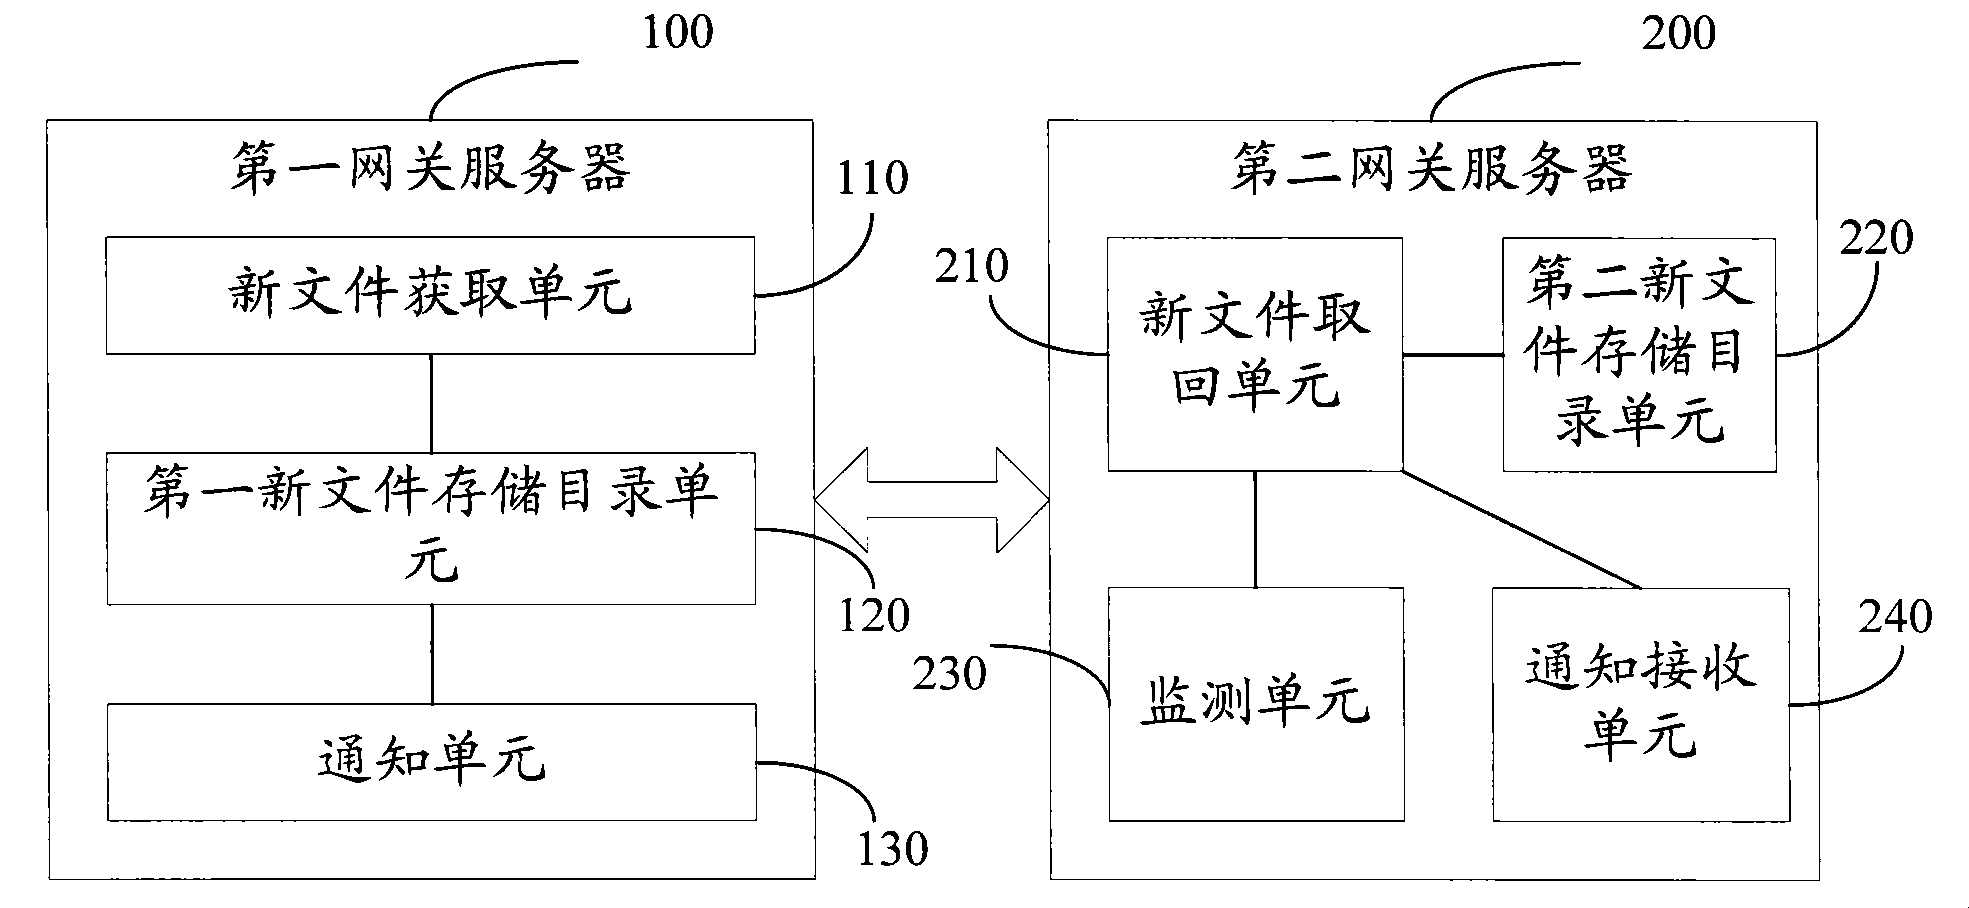 System for file interaction between networks